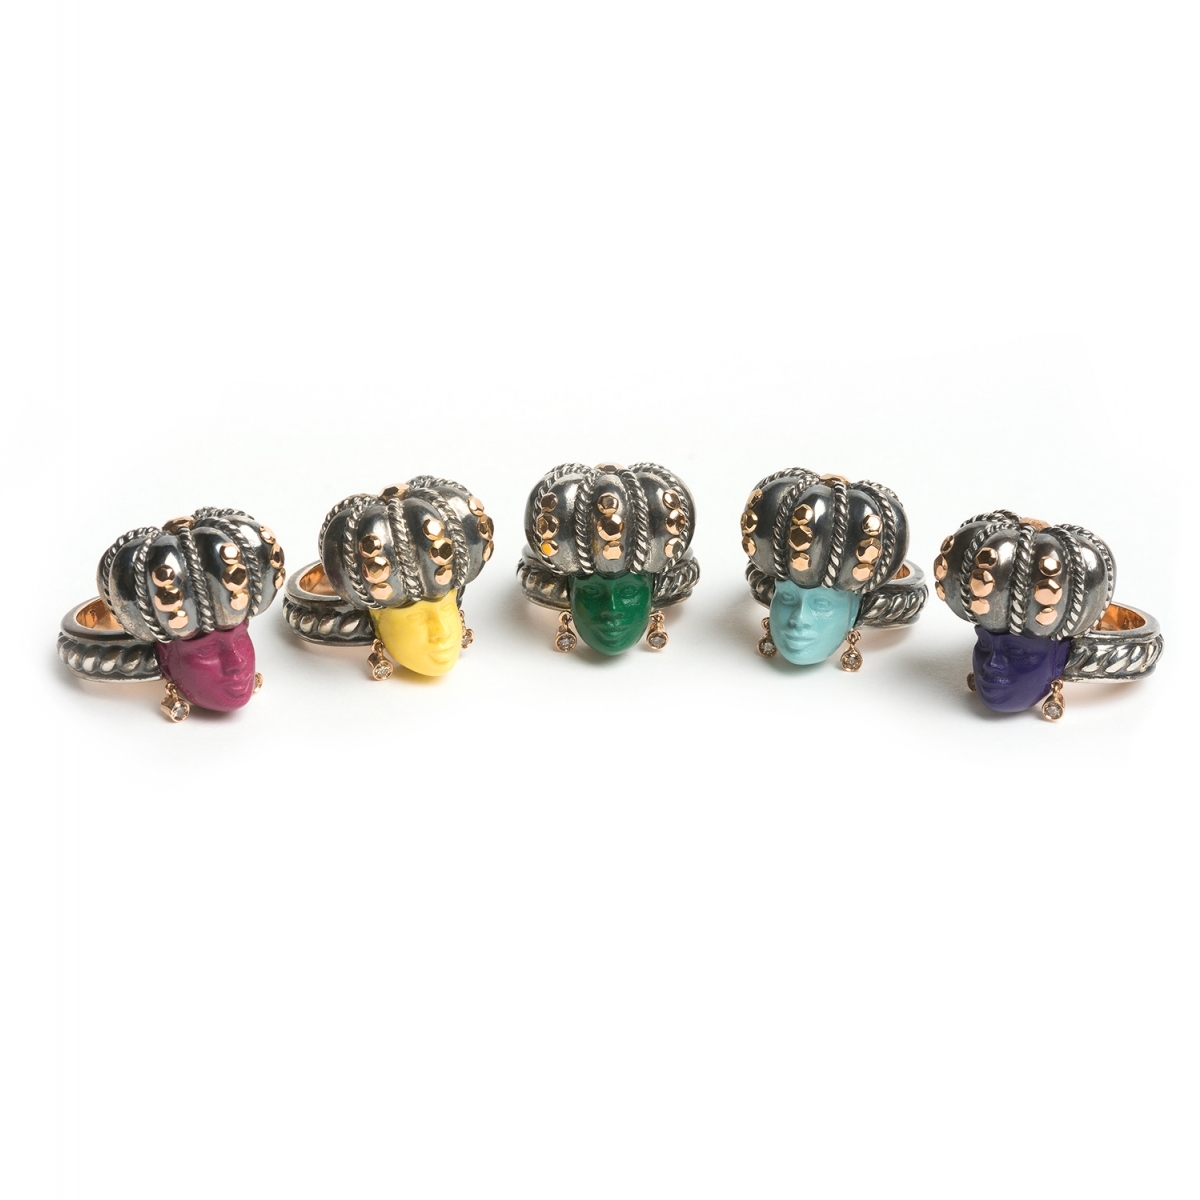 Marco Polo rings 